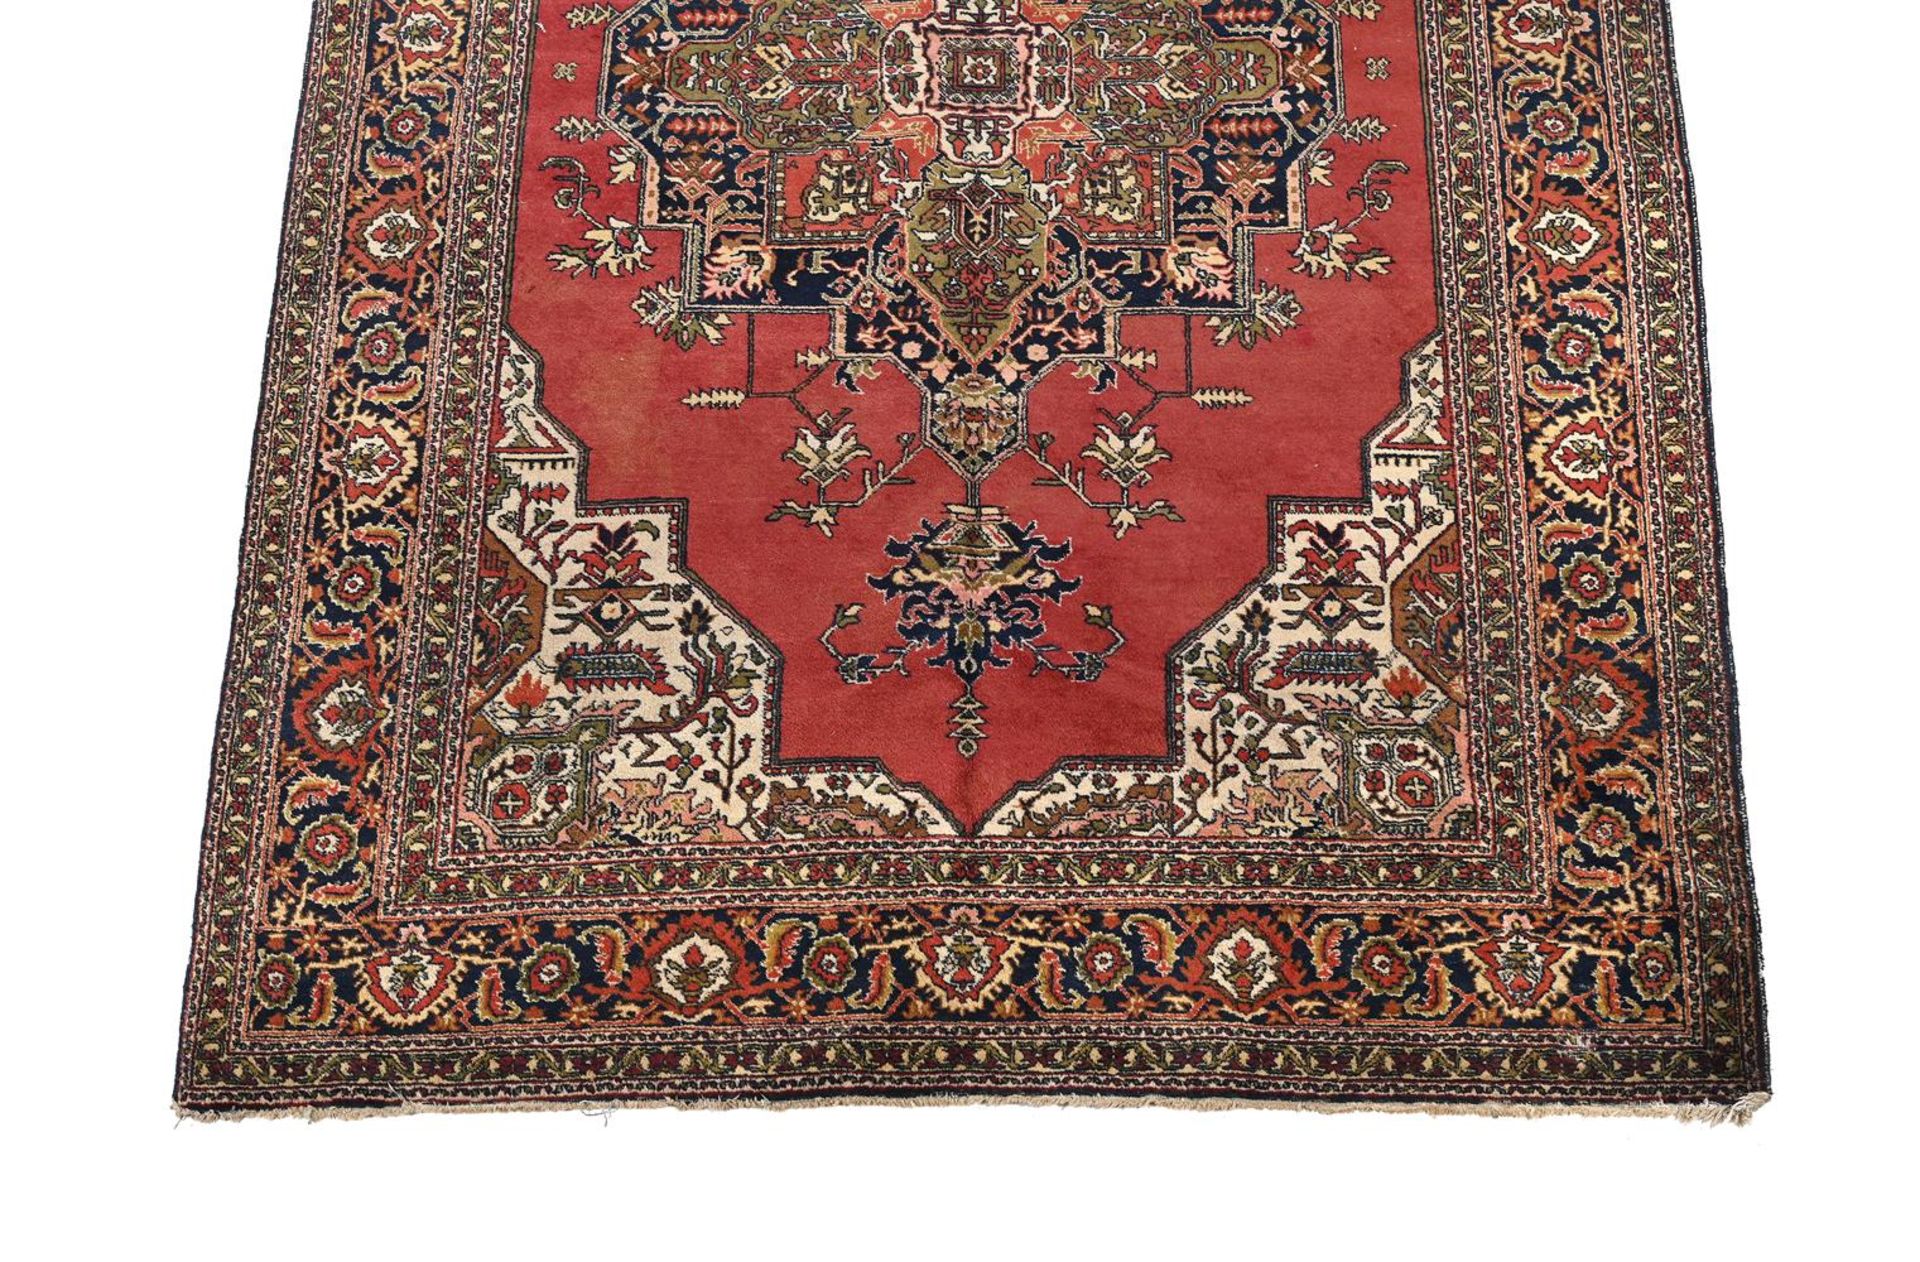 A WOVEN CARPET, PROBABLY TURKISH OR WEST PERSIAN - Image 2 of 2